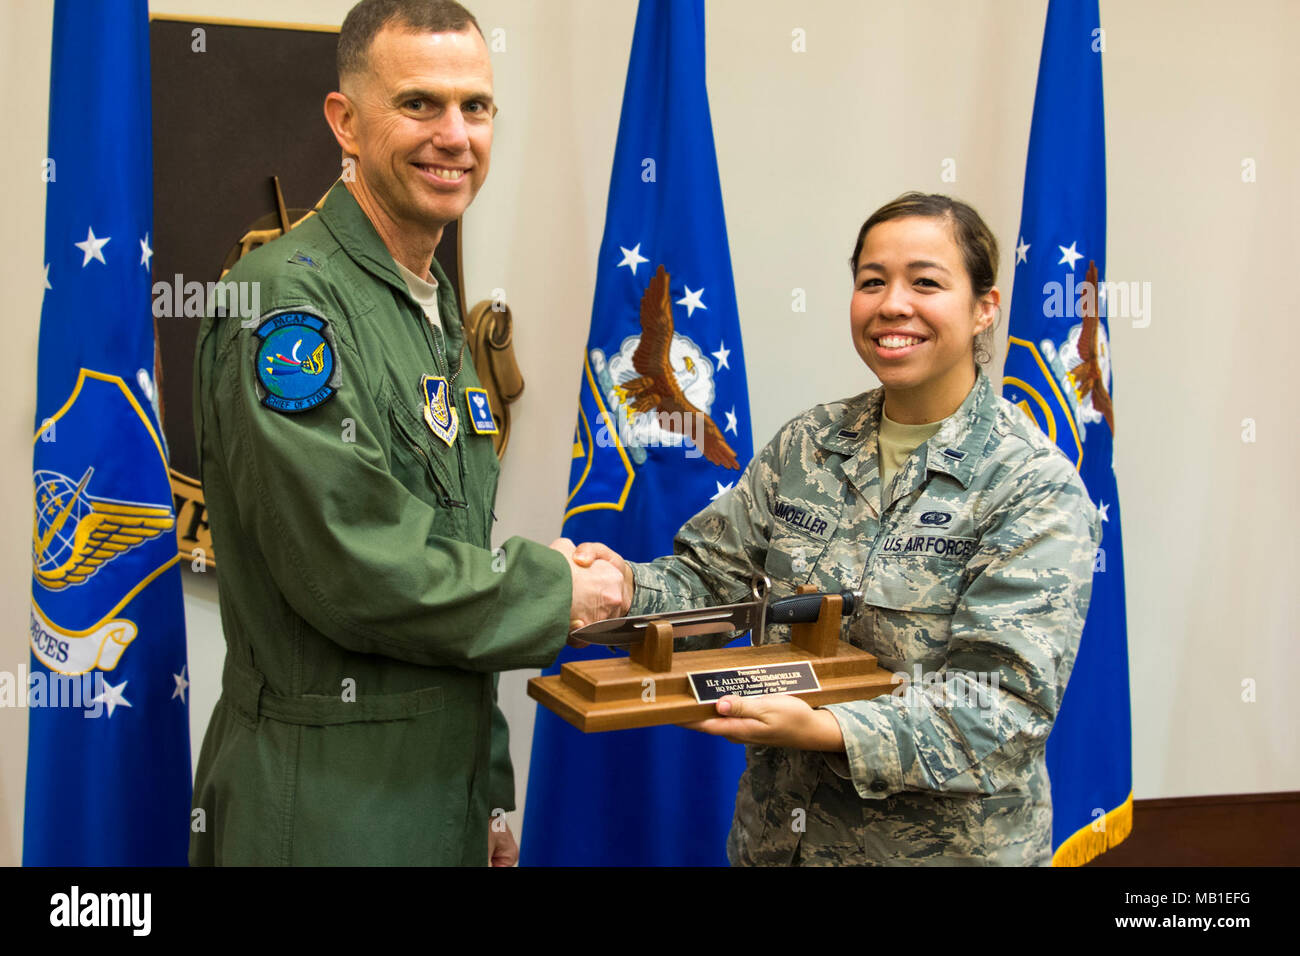 First Lt. Allyssa Schimmoeller is presented with the 2017 Volunteer of the Year award for Headquarters Pacific Air Forces from Brig. Gen. Gregory Guillot, Headquarters PACAF chief of staff, during the 2017 Outstanding Airman of the Year ceremony Feb. 9, 2018, at Joint Base Pearl Harbor-Hickam, Hawaii. Outstanding Airman of the Year awards are presented to recipients who have demonstrated superior leadership, job performance and personal achievement throughout the year. Stock Photo